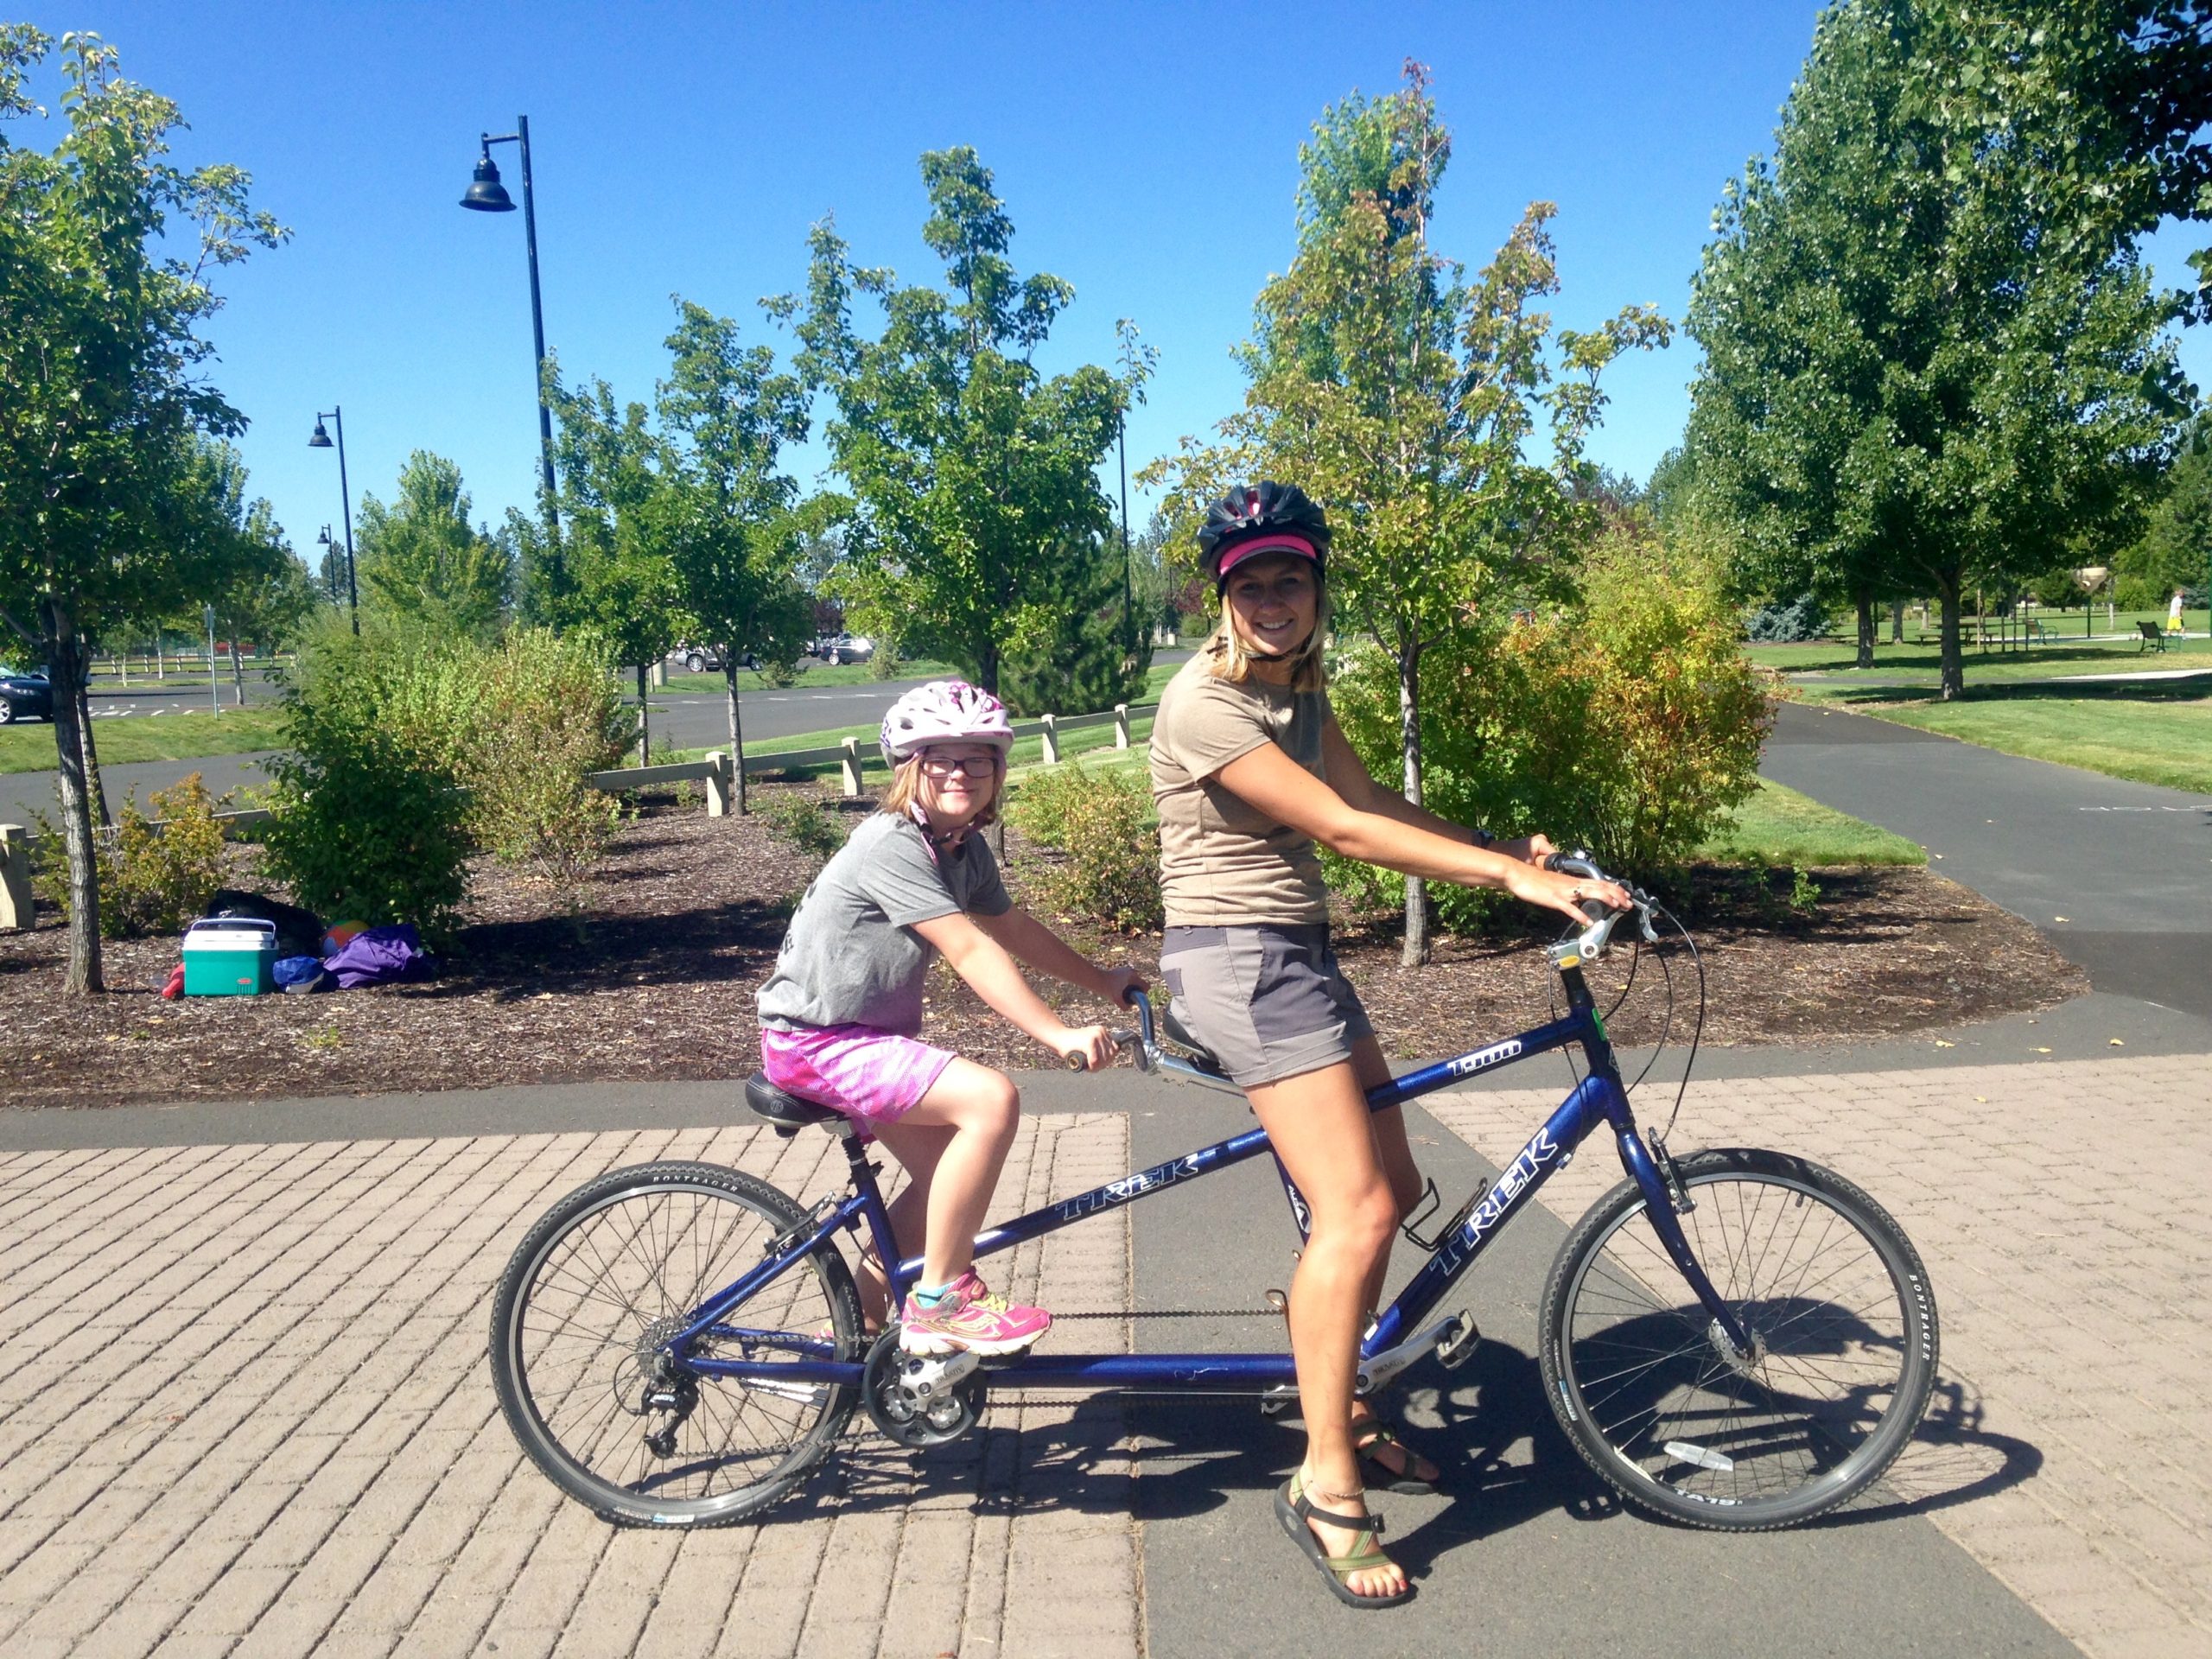 kellie and a younger smiling friend on tandem cycle